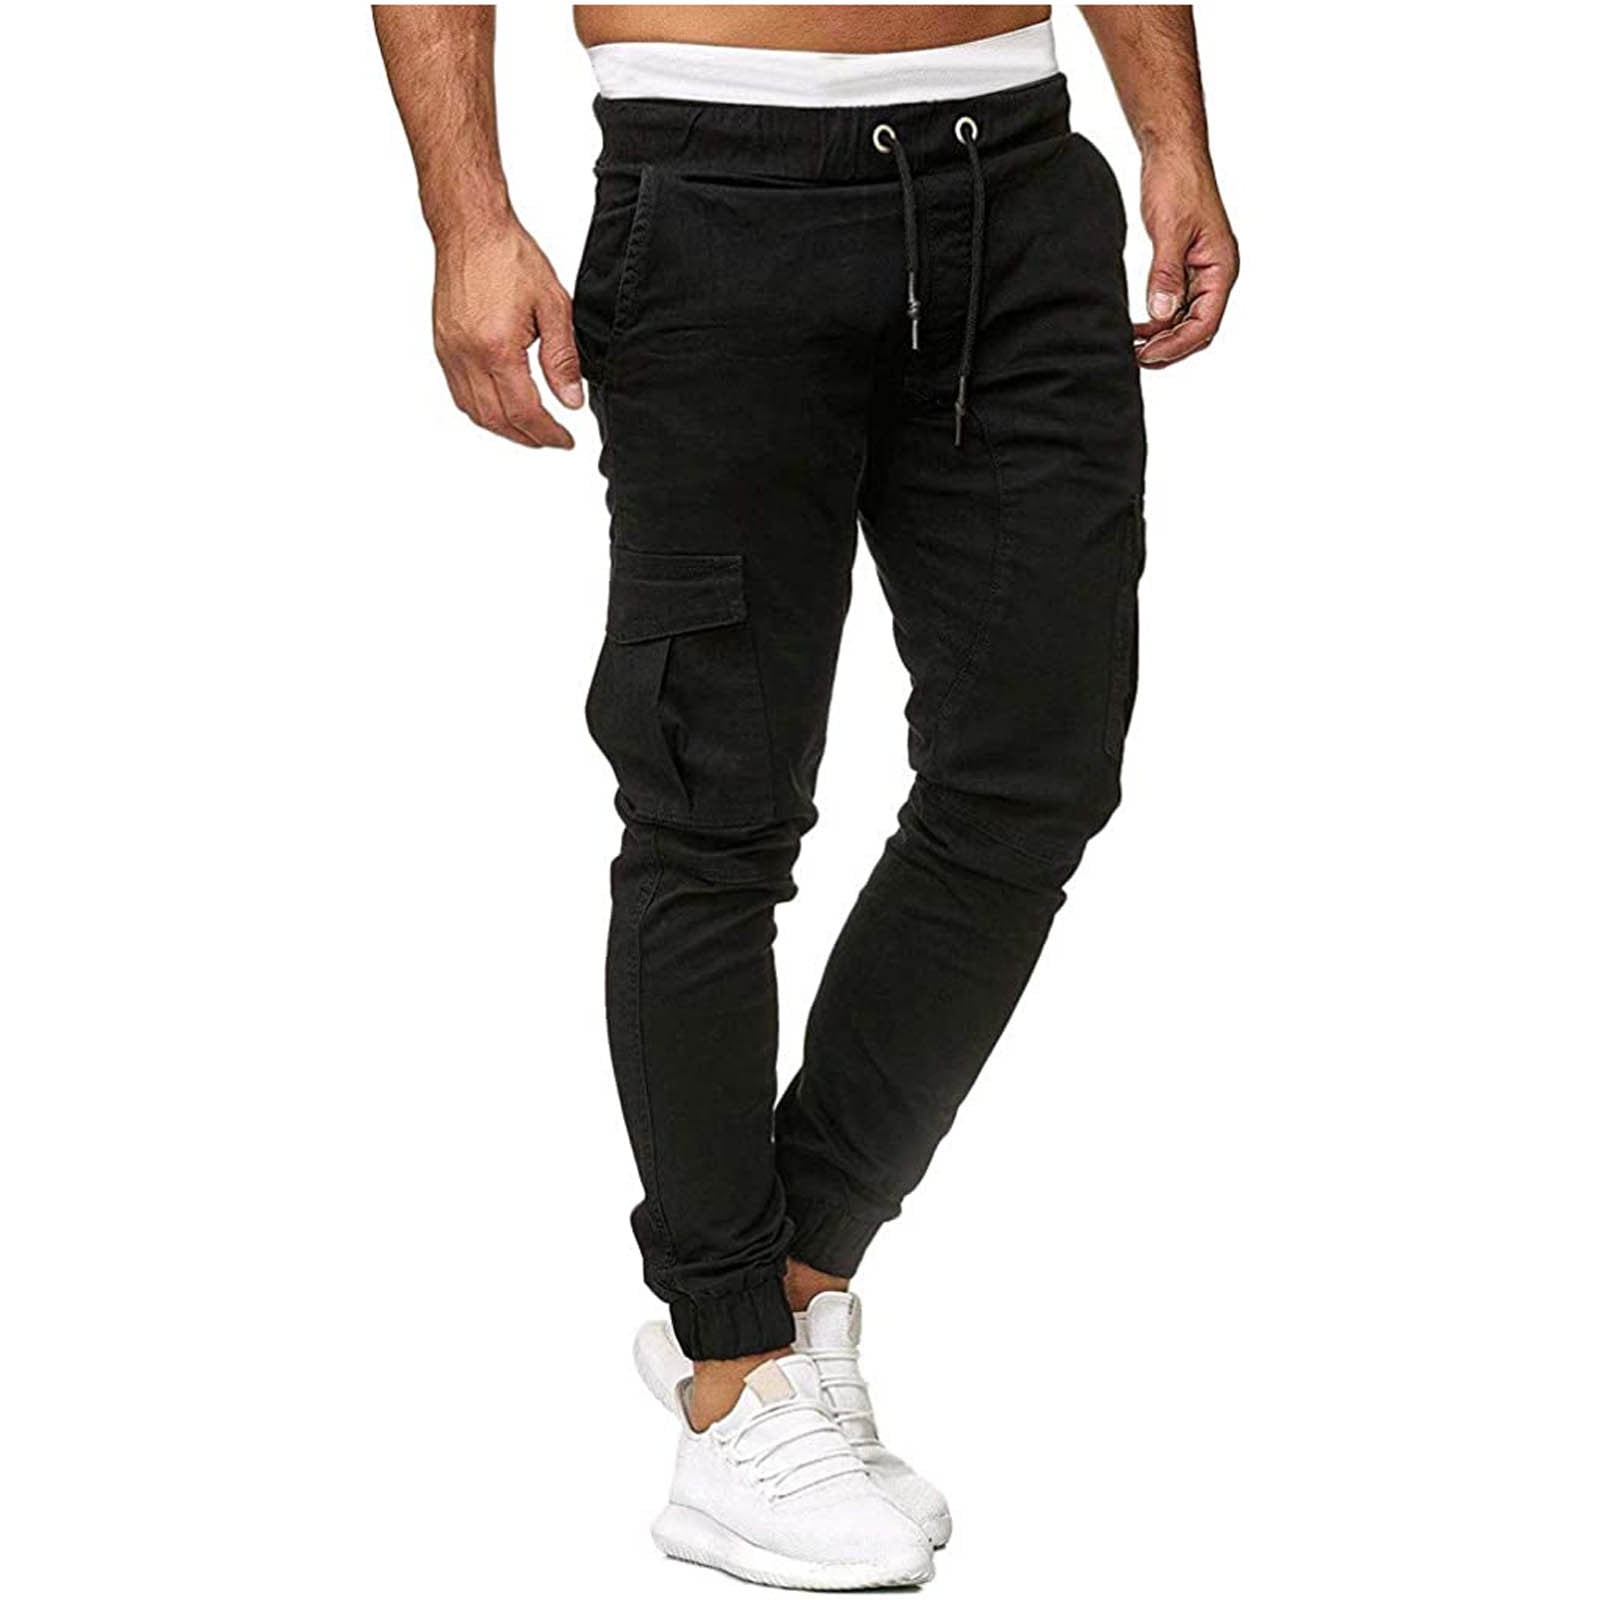 Ernkv Long Cargo Pants for Men Solid Color Fashion Fall Spring Trousers  Soft Cargo Sport Jogger Jogging Elastic Waist Comfy Lounge Casual Shorts  with Pocket Black L 